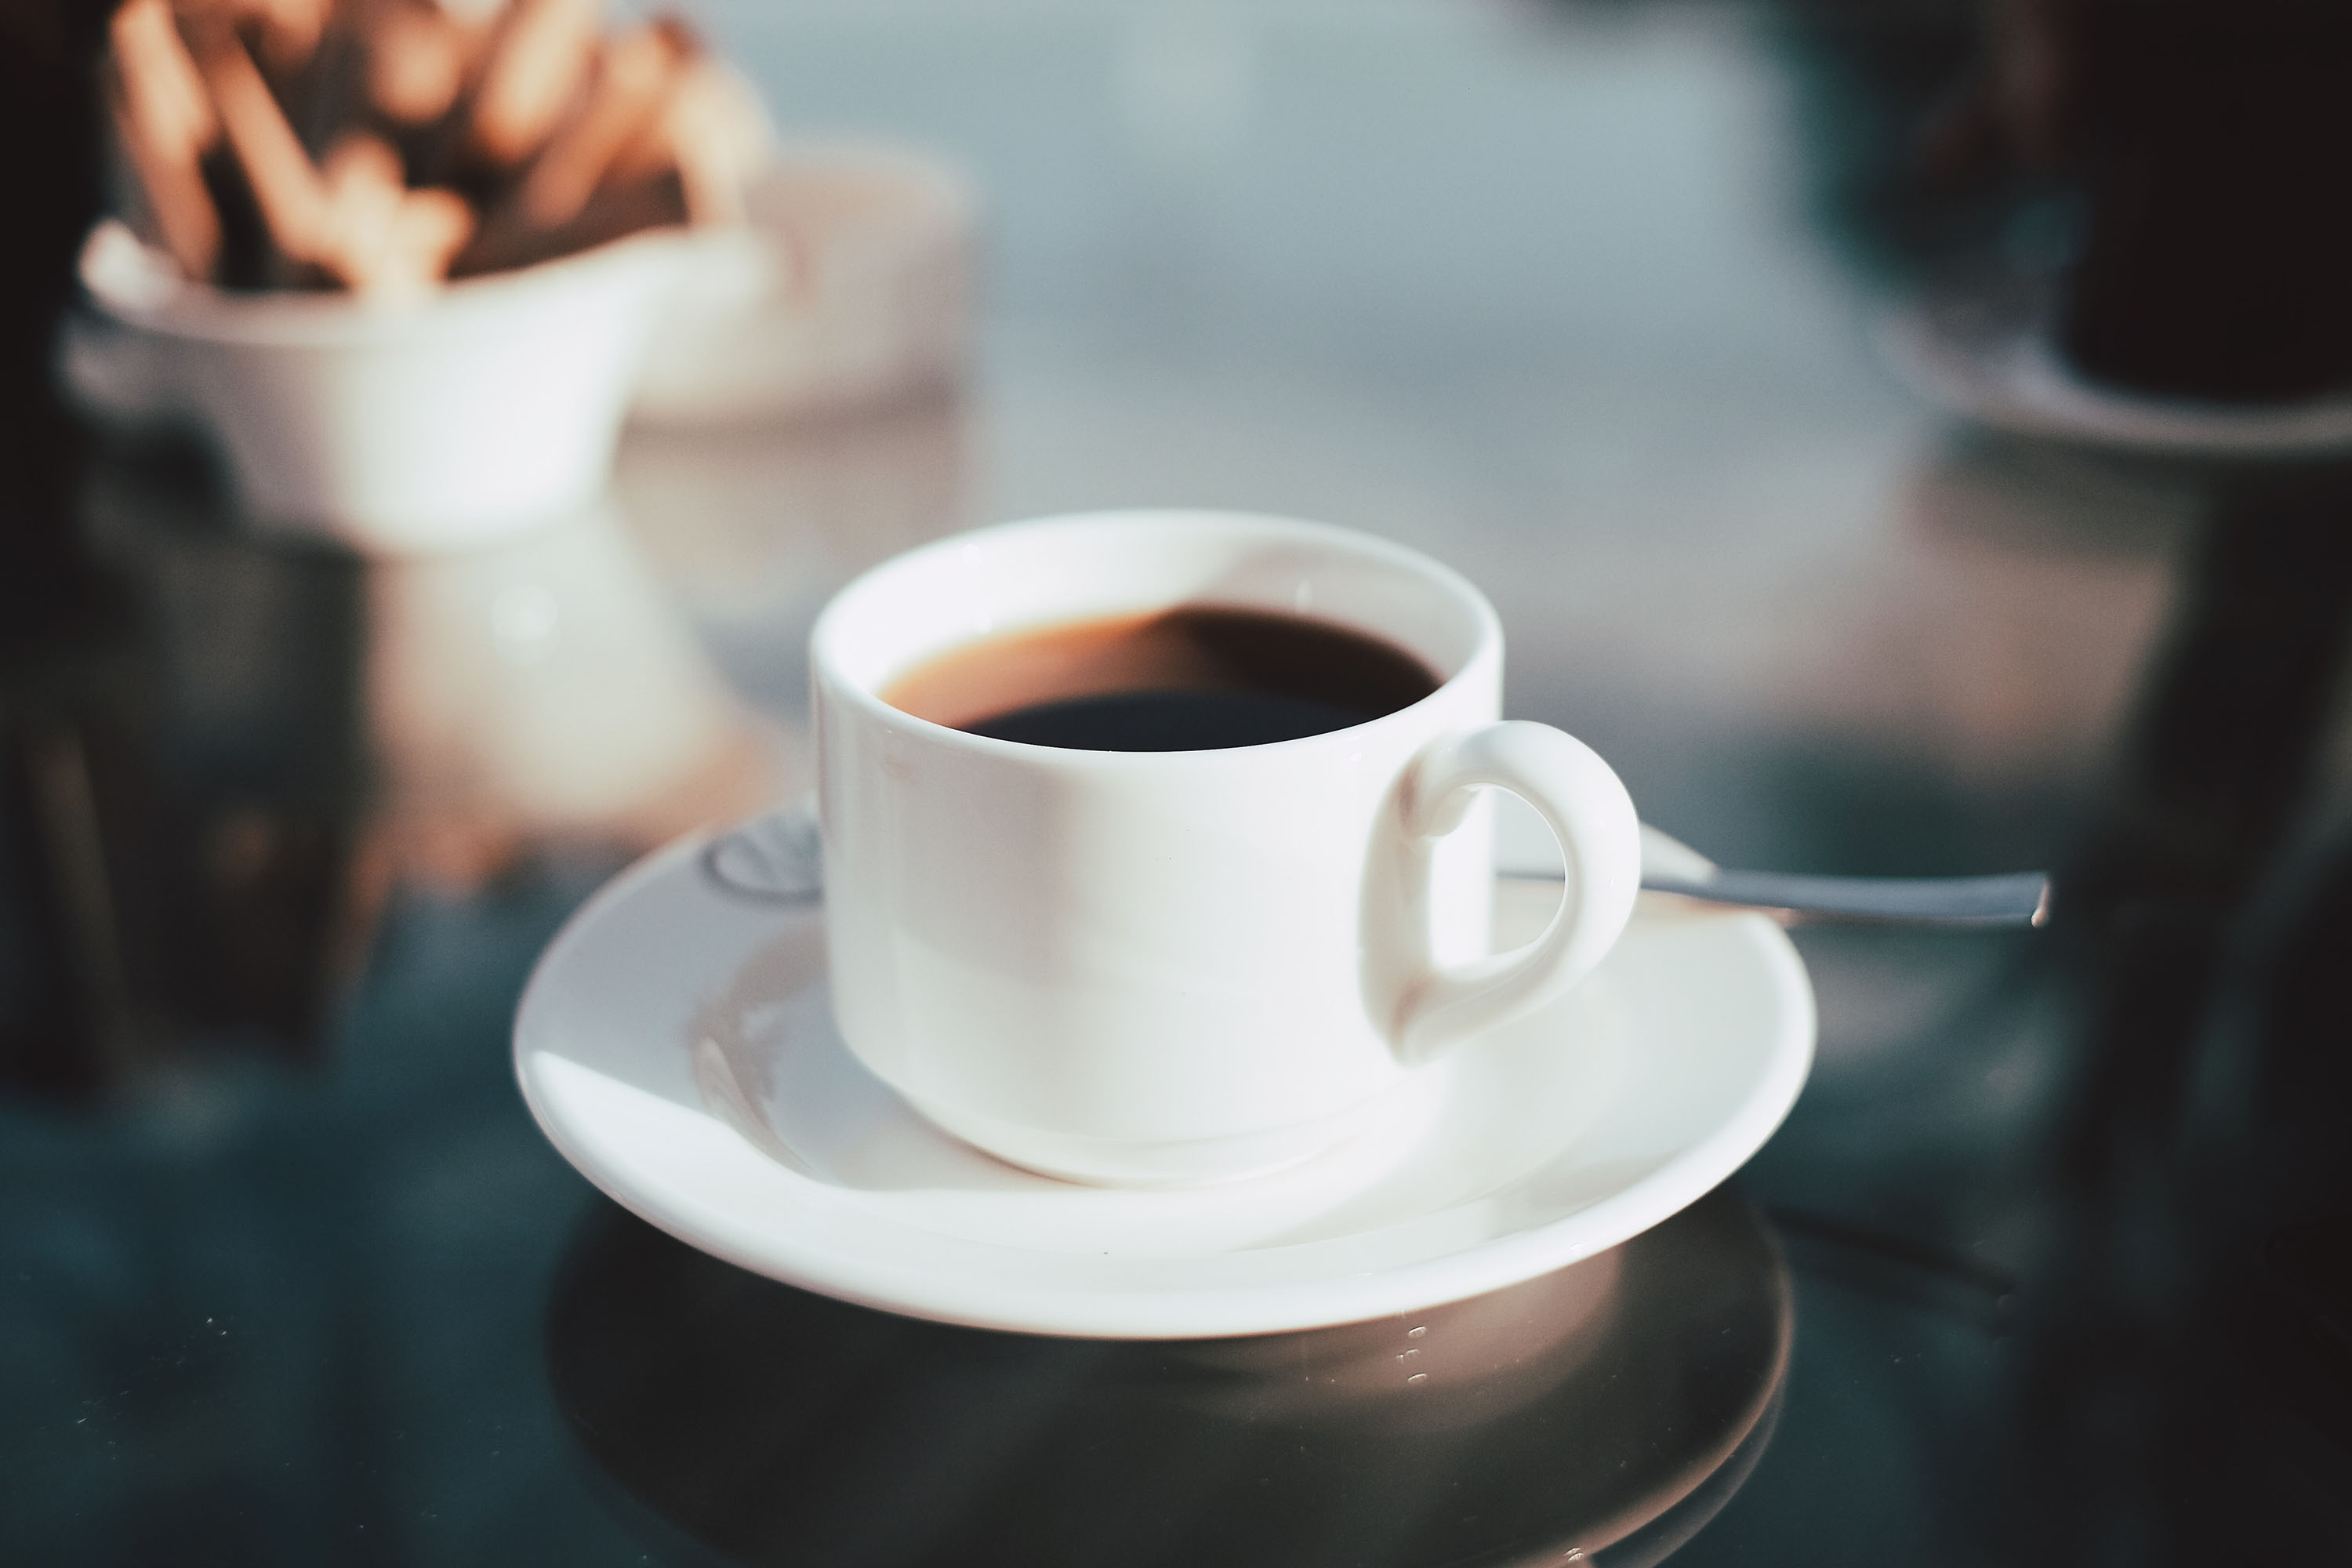 https://www.themanual.com/wp-content/uploads/sites/9/2022/10/small-coffee-cup-and-saucer.jpg?fit=800%2C800&p=1